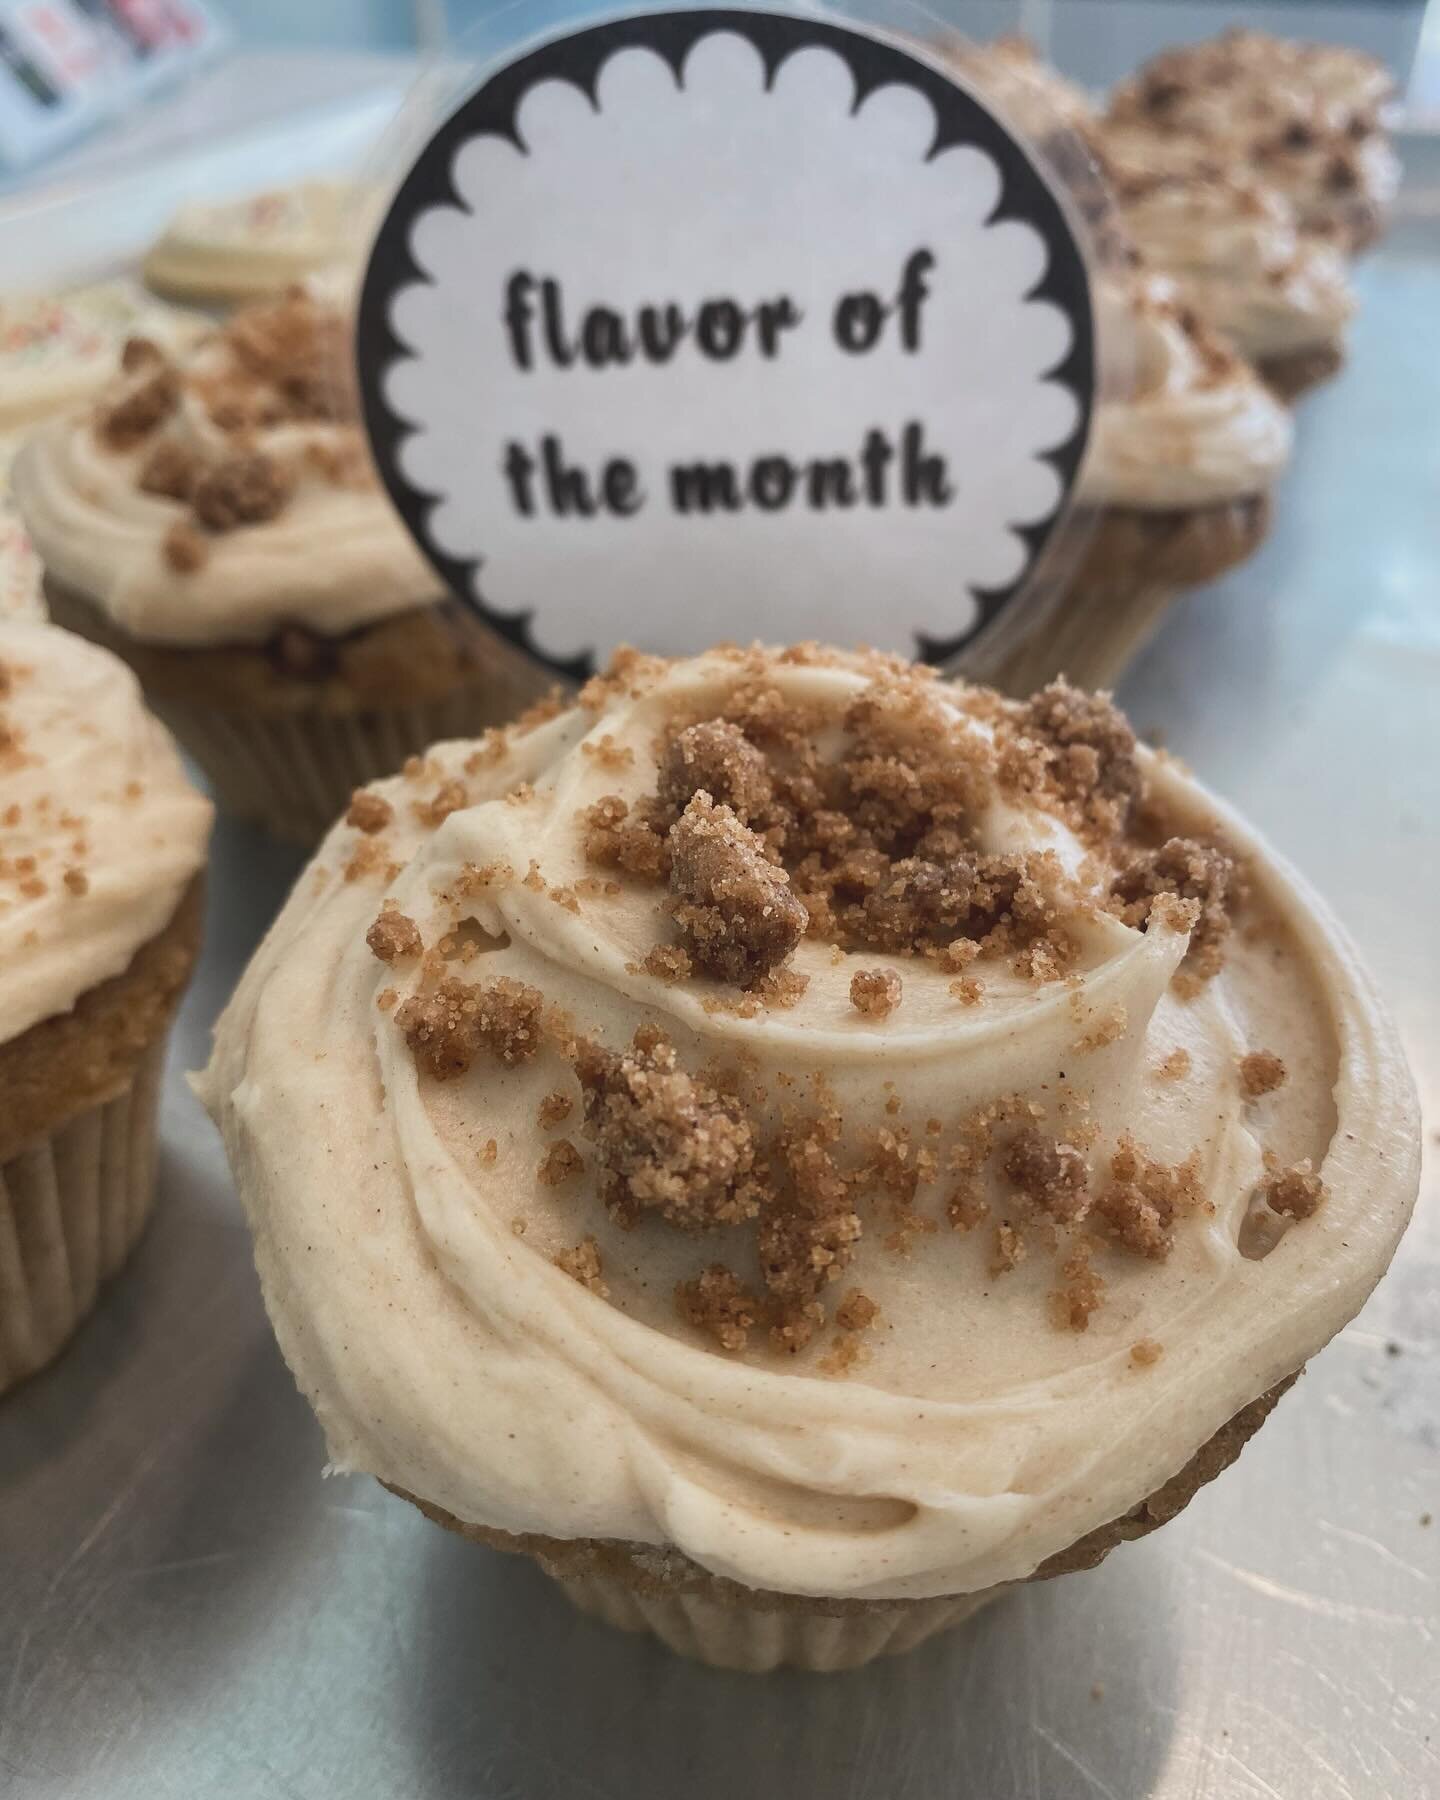 Happy New Year to our Frosted Fans! It&rsquo;s time to introduce the flavors available throughout January.😊 Starting off with our FOM, Cinnamon Streusel with a Cinnamon Buttercream, our seasonal flavor is Banana Chocolate (available through February